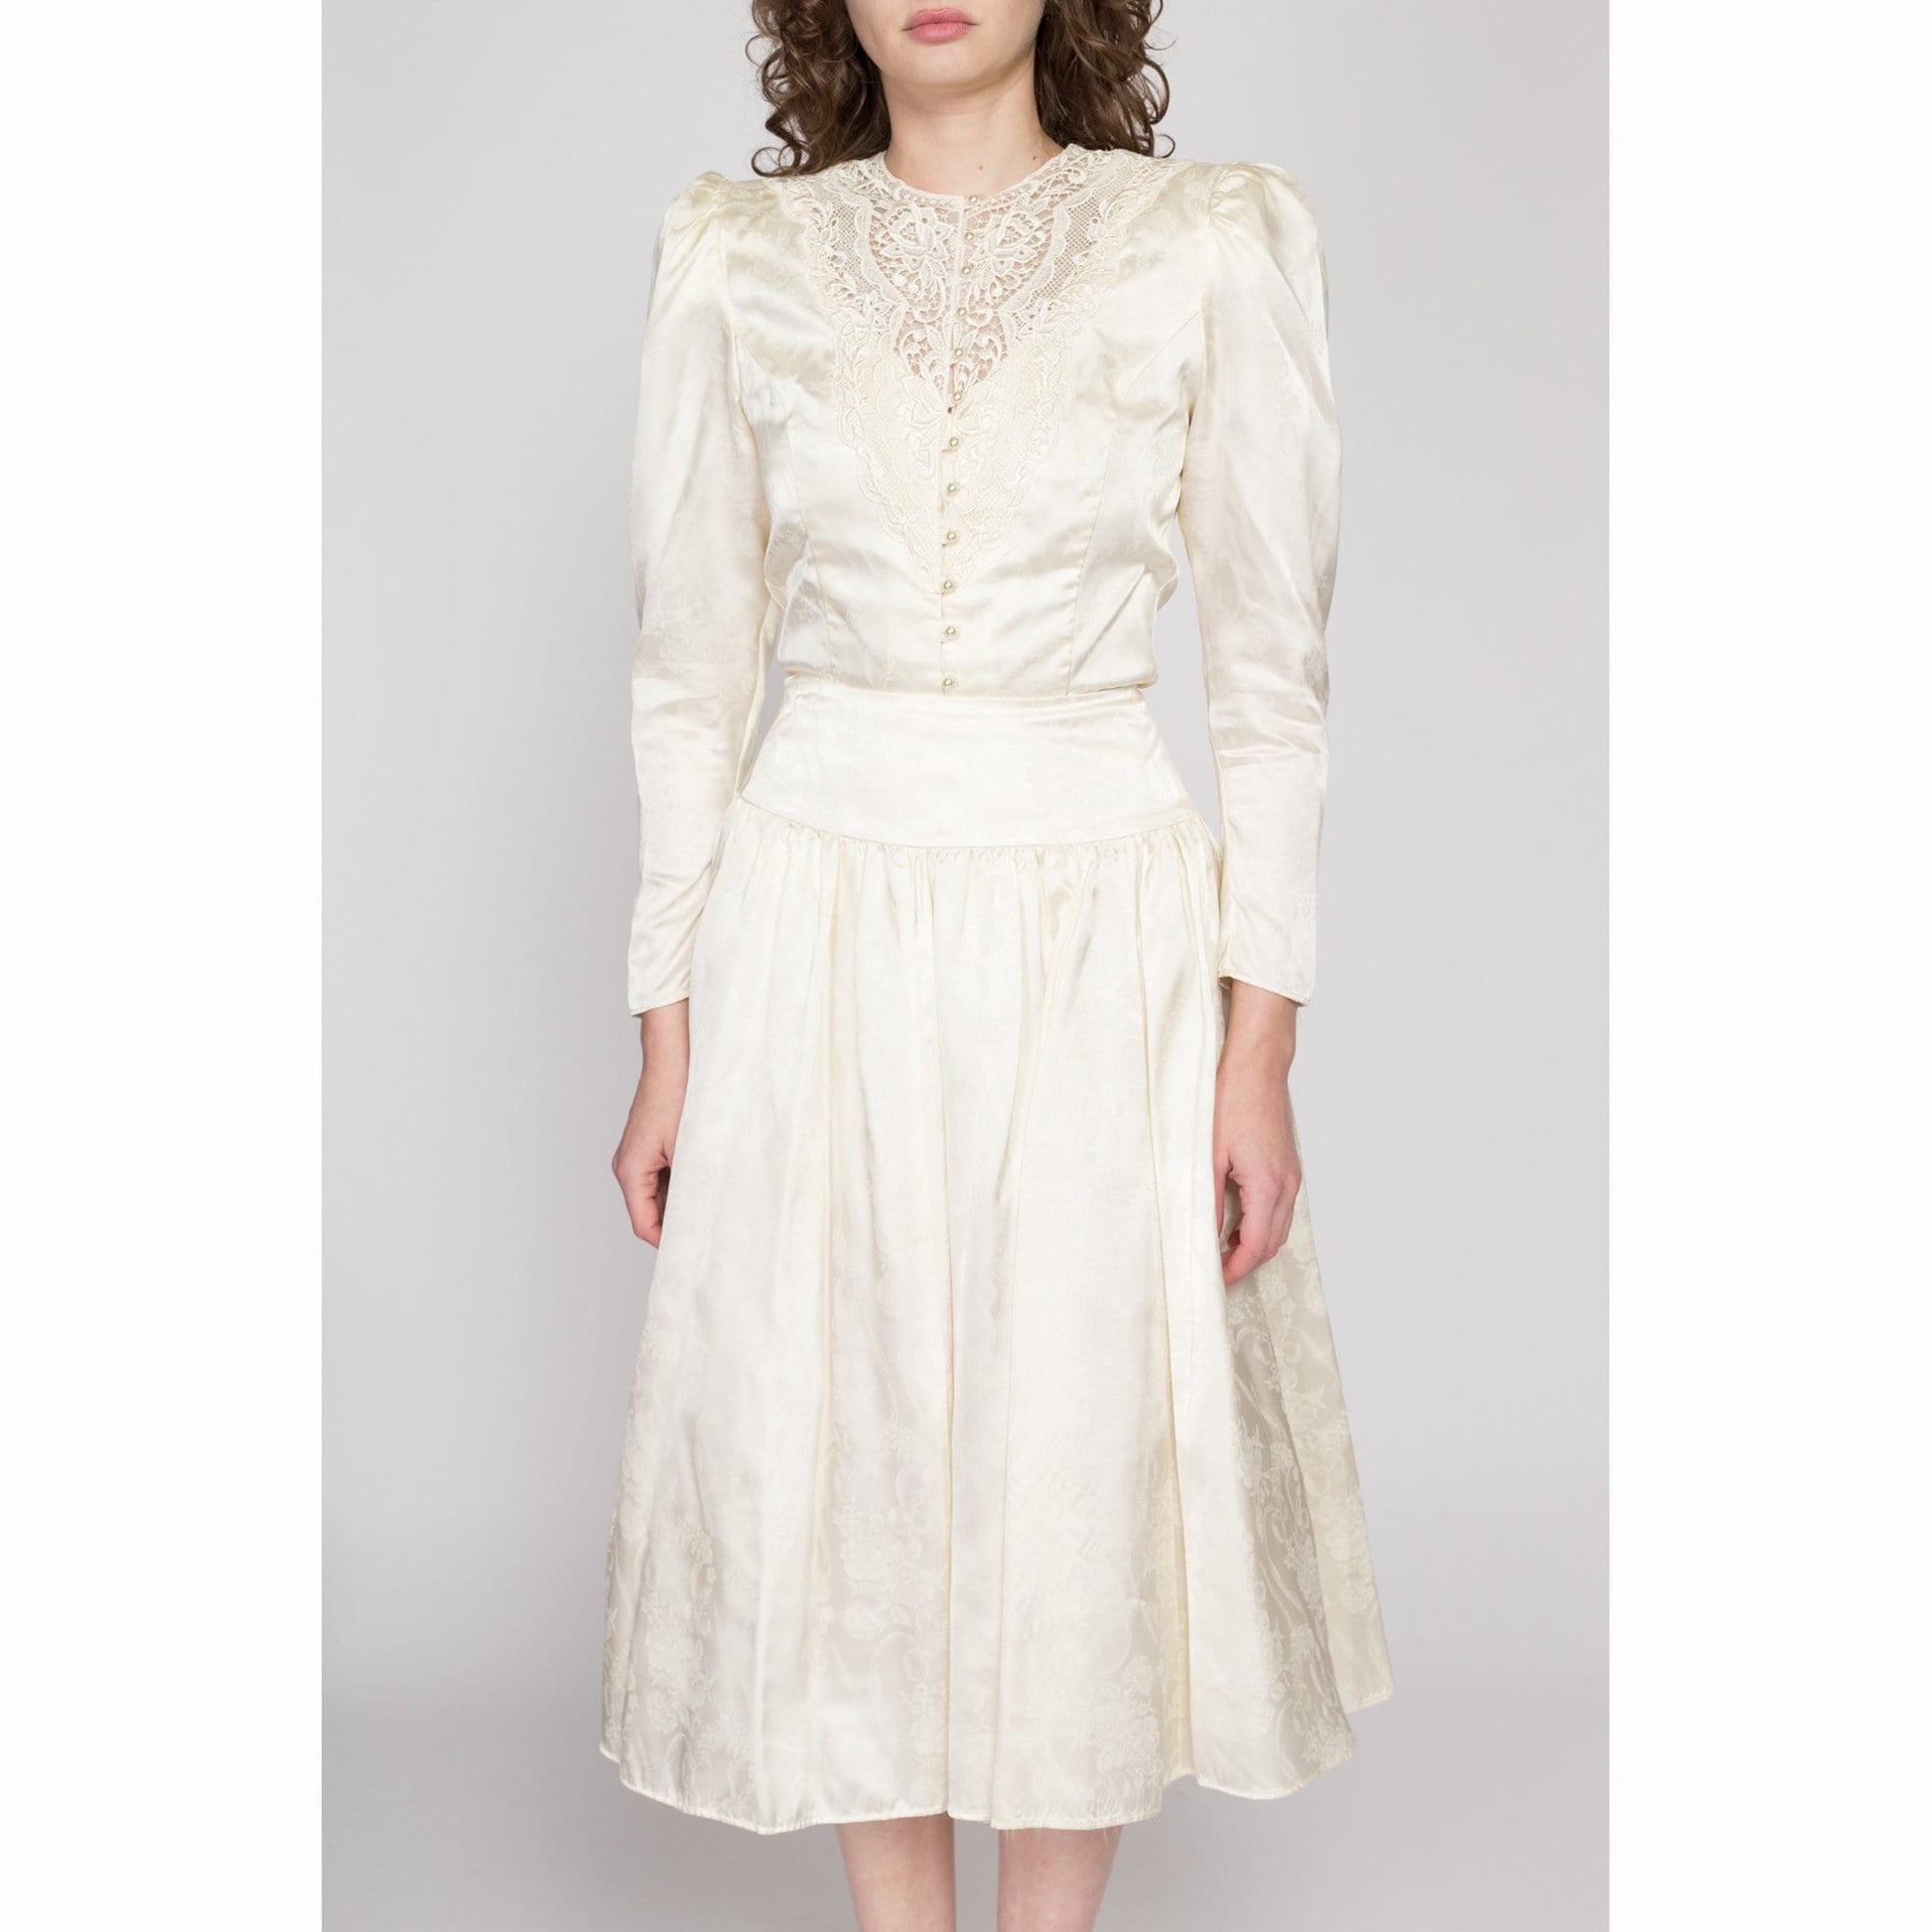 Small 80s Jessica McClintock Victorian Ivory Satin Skirt Suit | Vintage Button Up Jacket & High Waisted Midi Skirt Two Piece Bridal Outfit